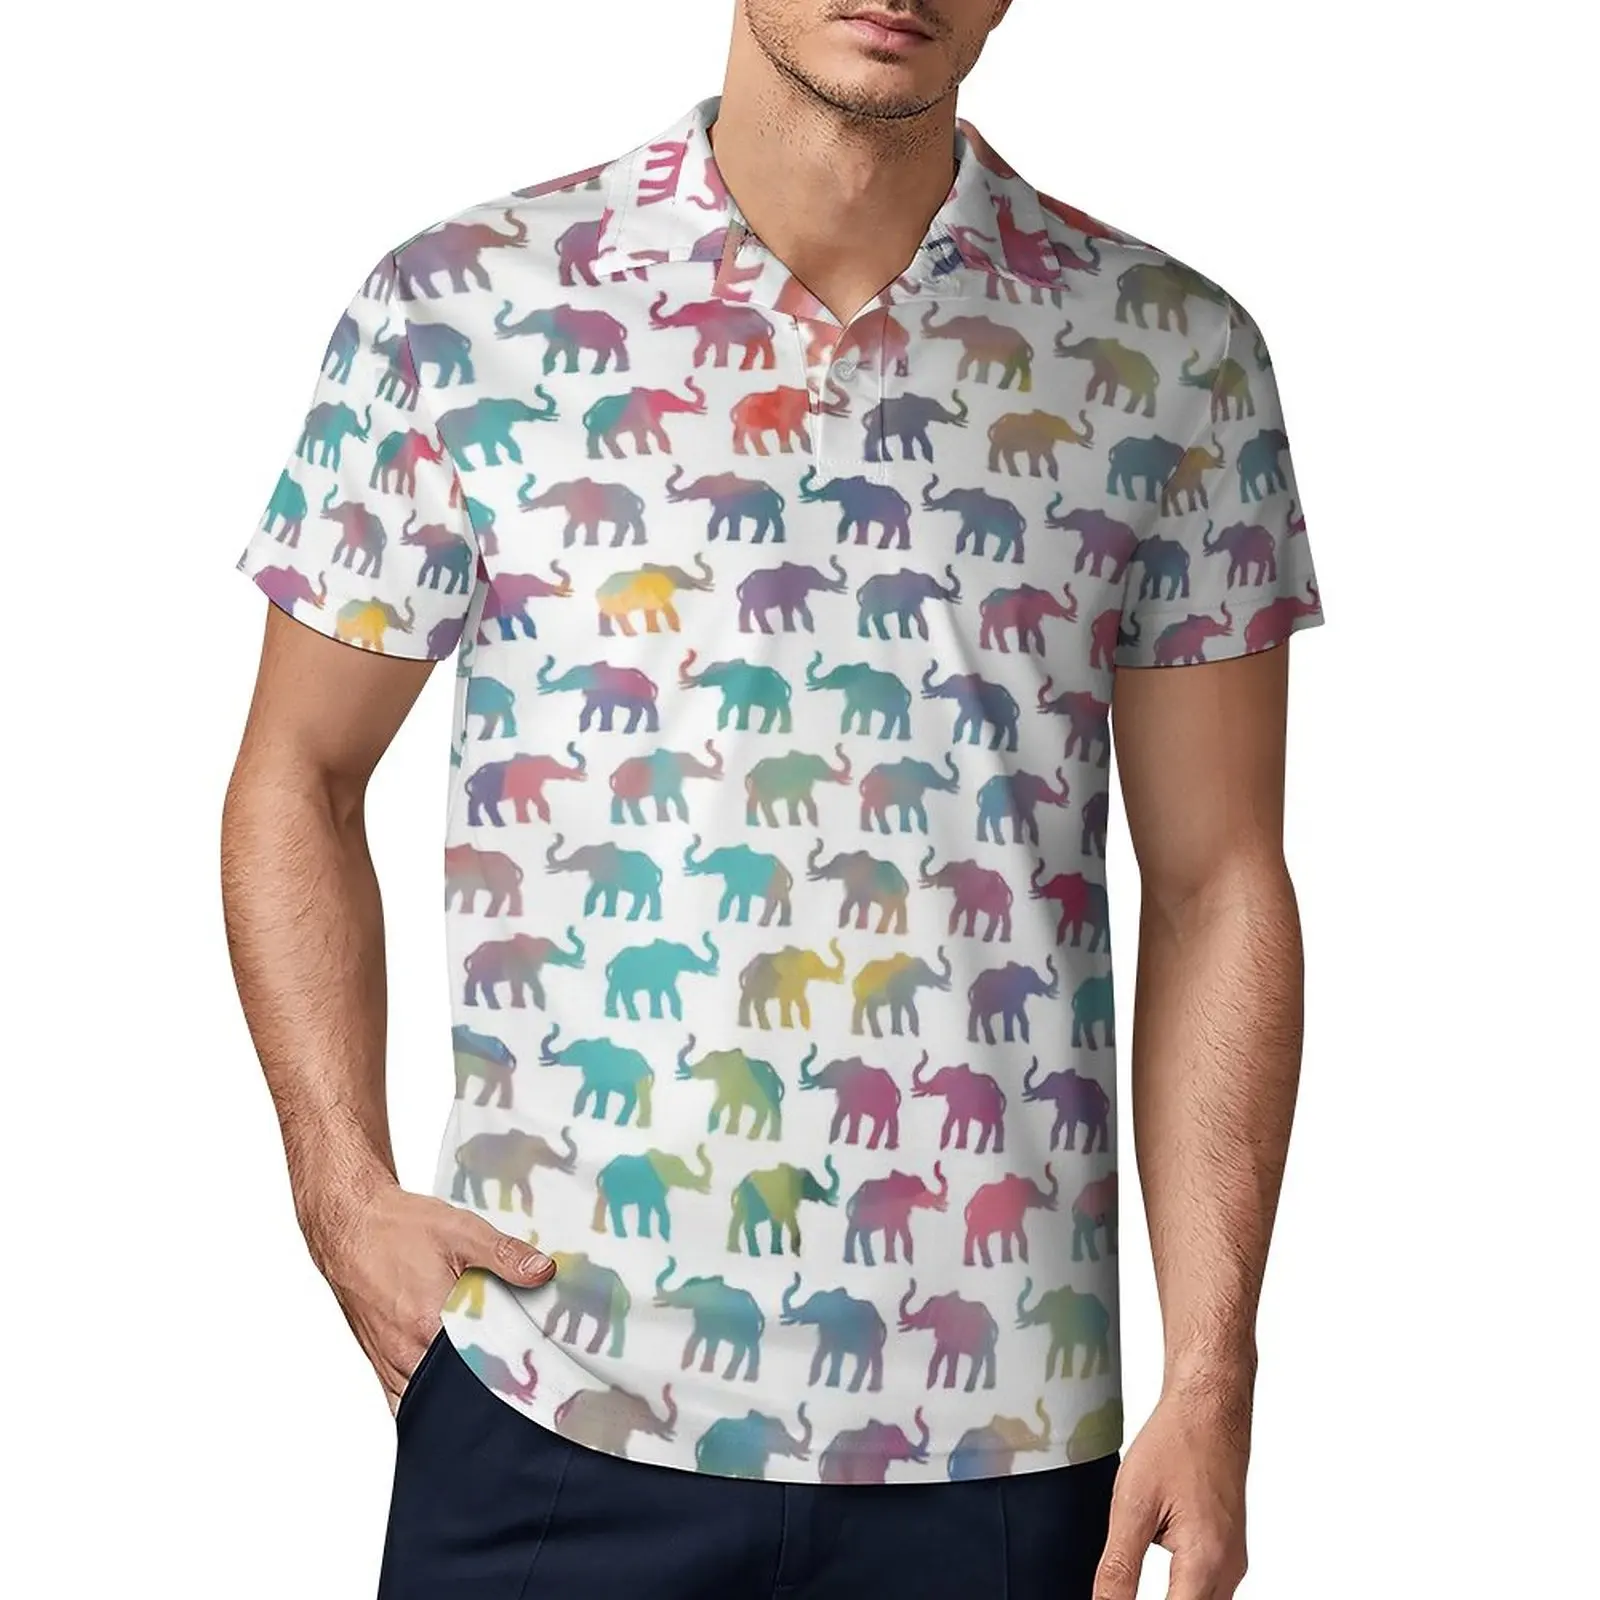 

Colorful Elephant Casual T-Shirts Elephants on Parade in Watercolor Polo Shirt Turn-Down Collar Street Style Shirt Day Men Top